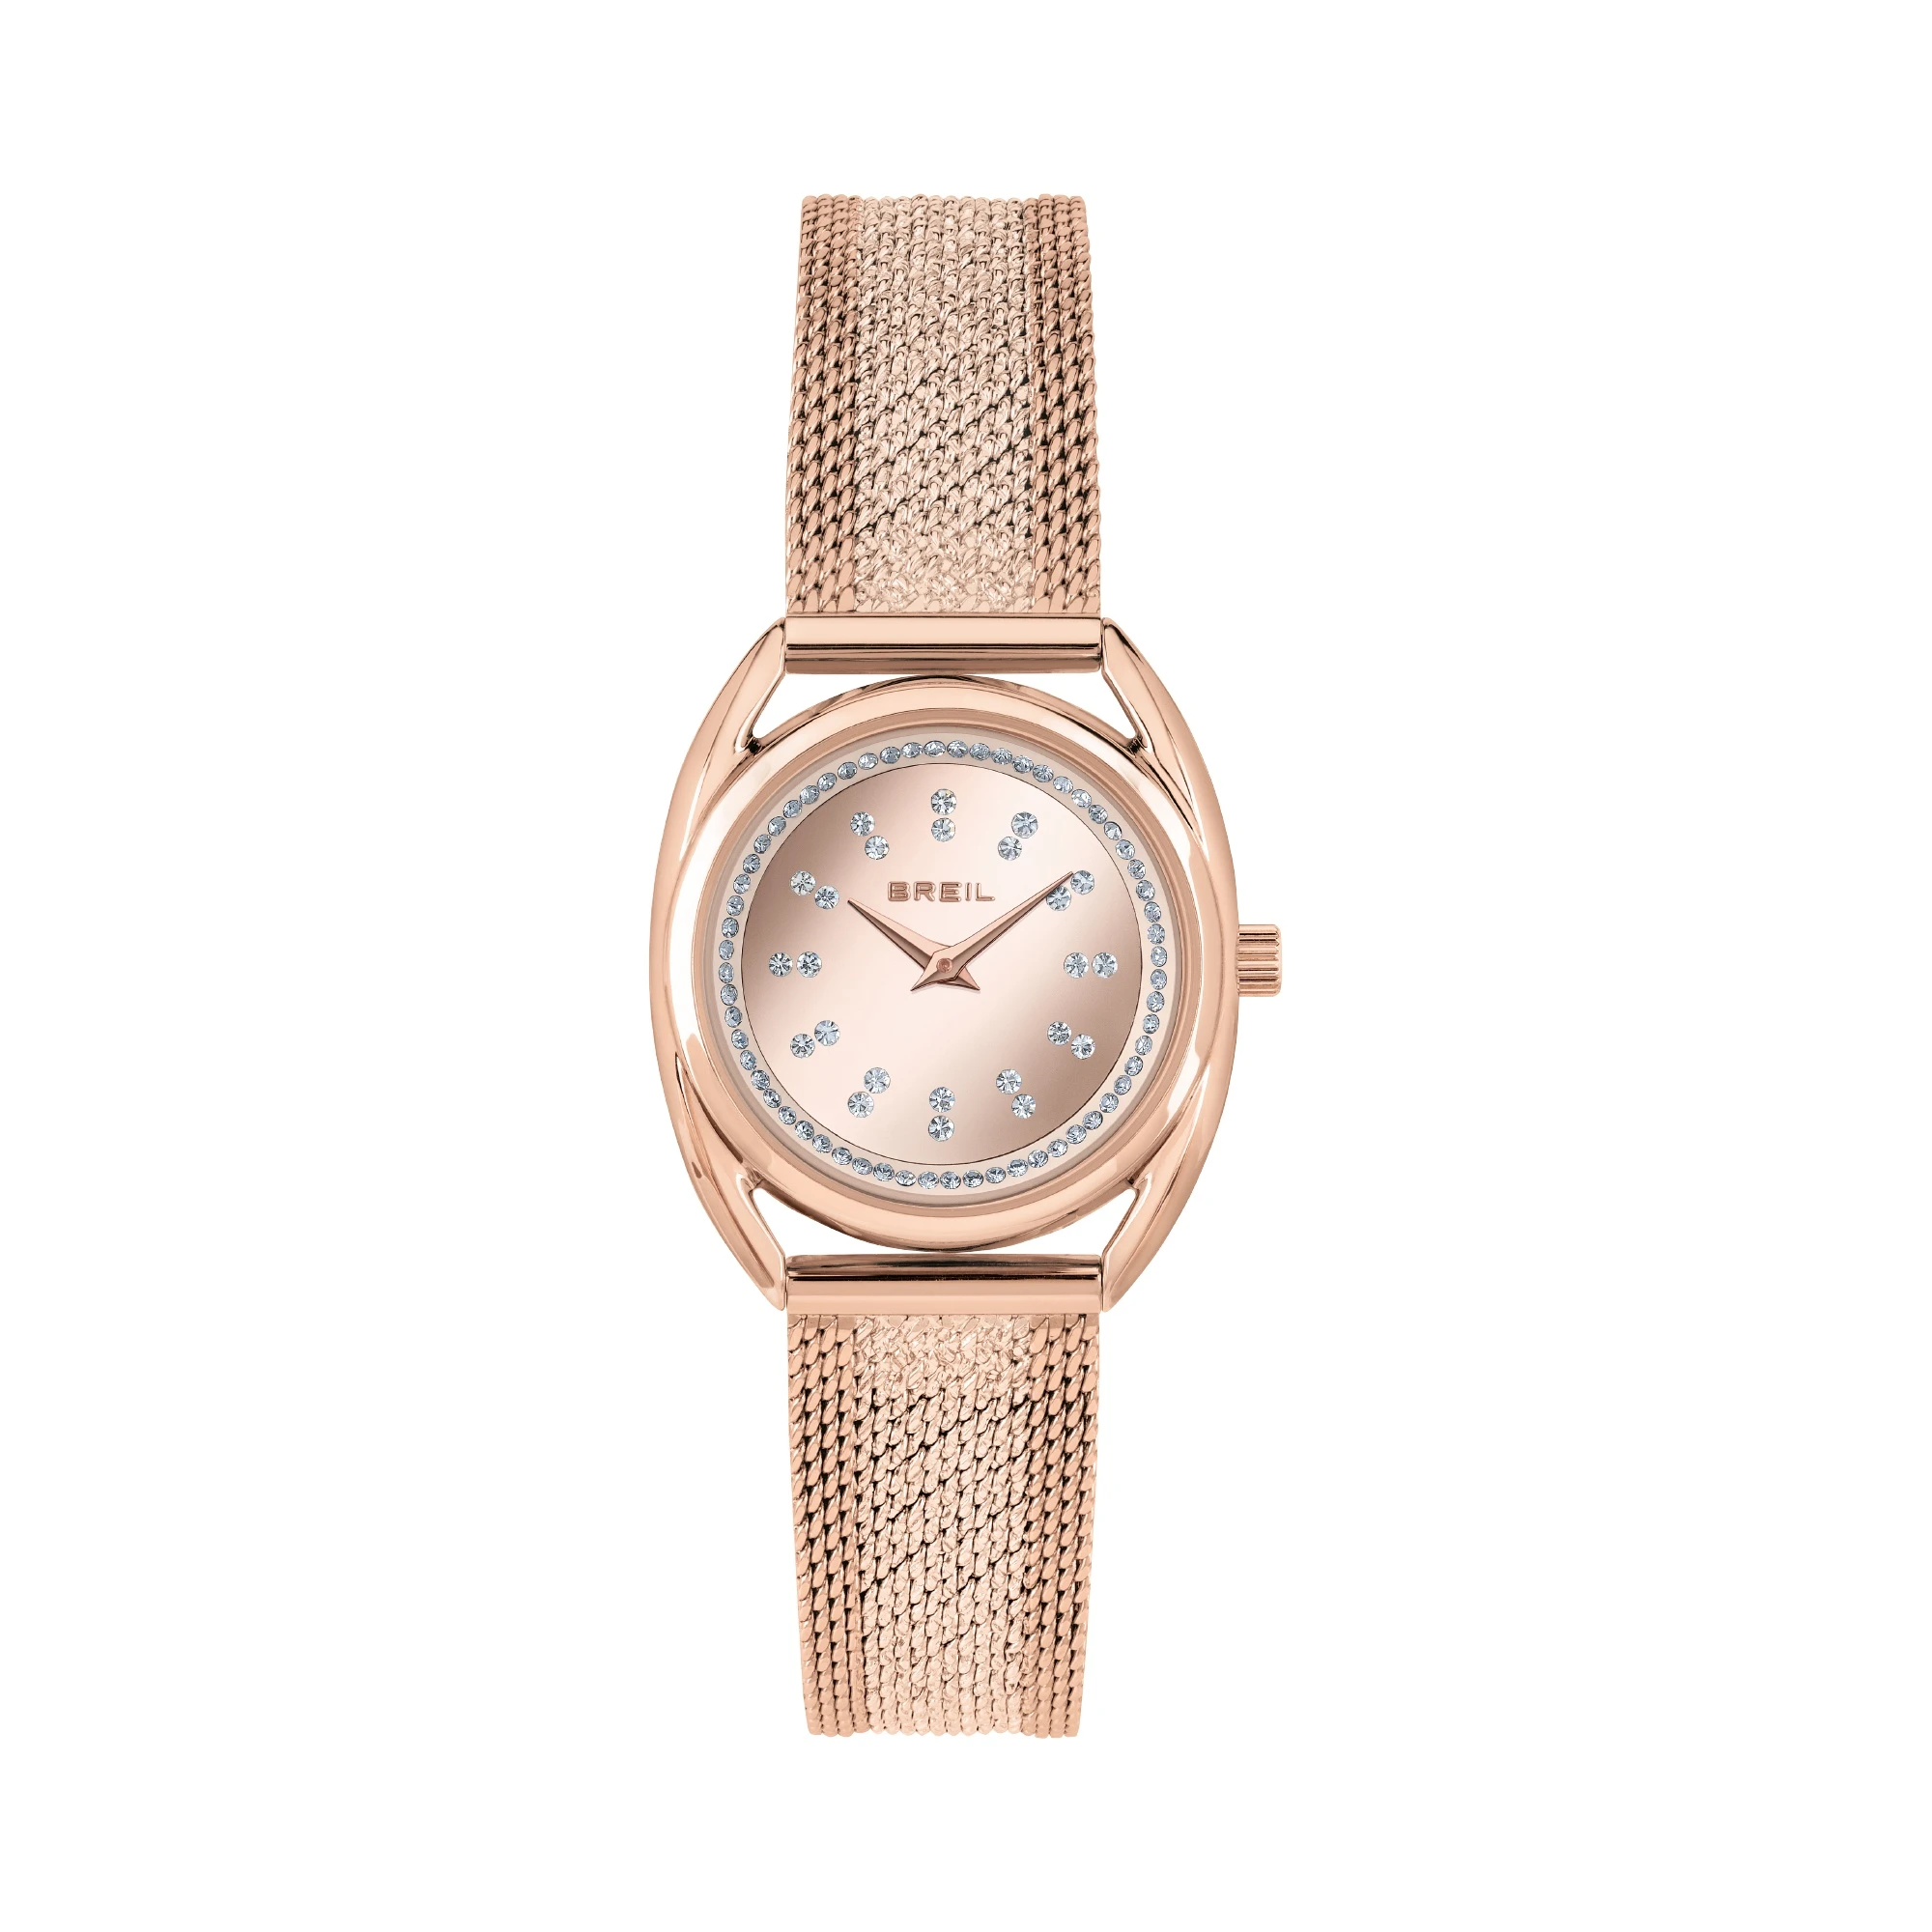 PETIT CHARME - TIME ONLY LADY 28 MM - 1 - TW1895 | Breil